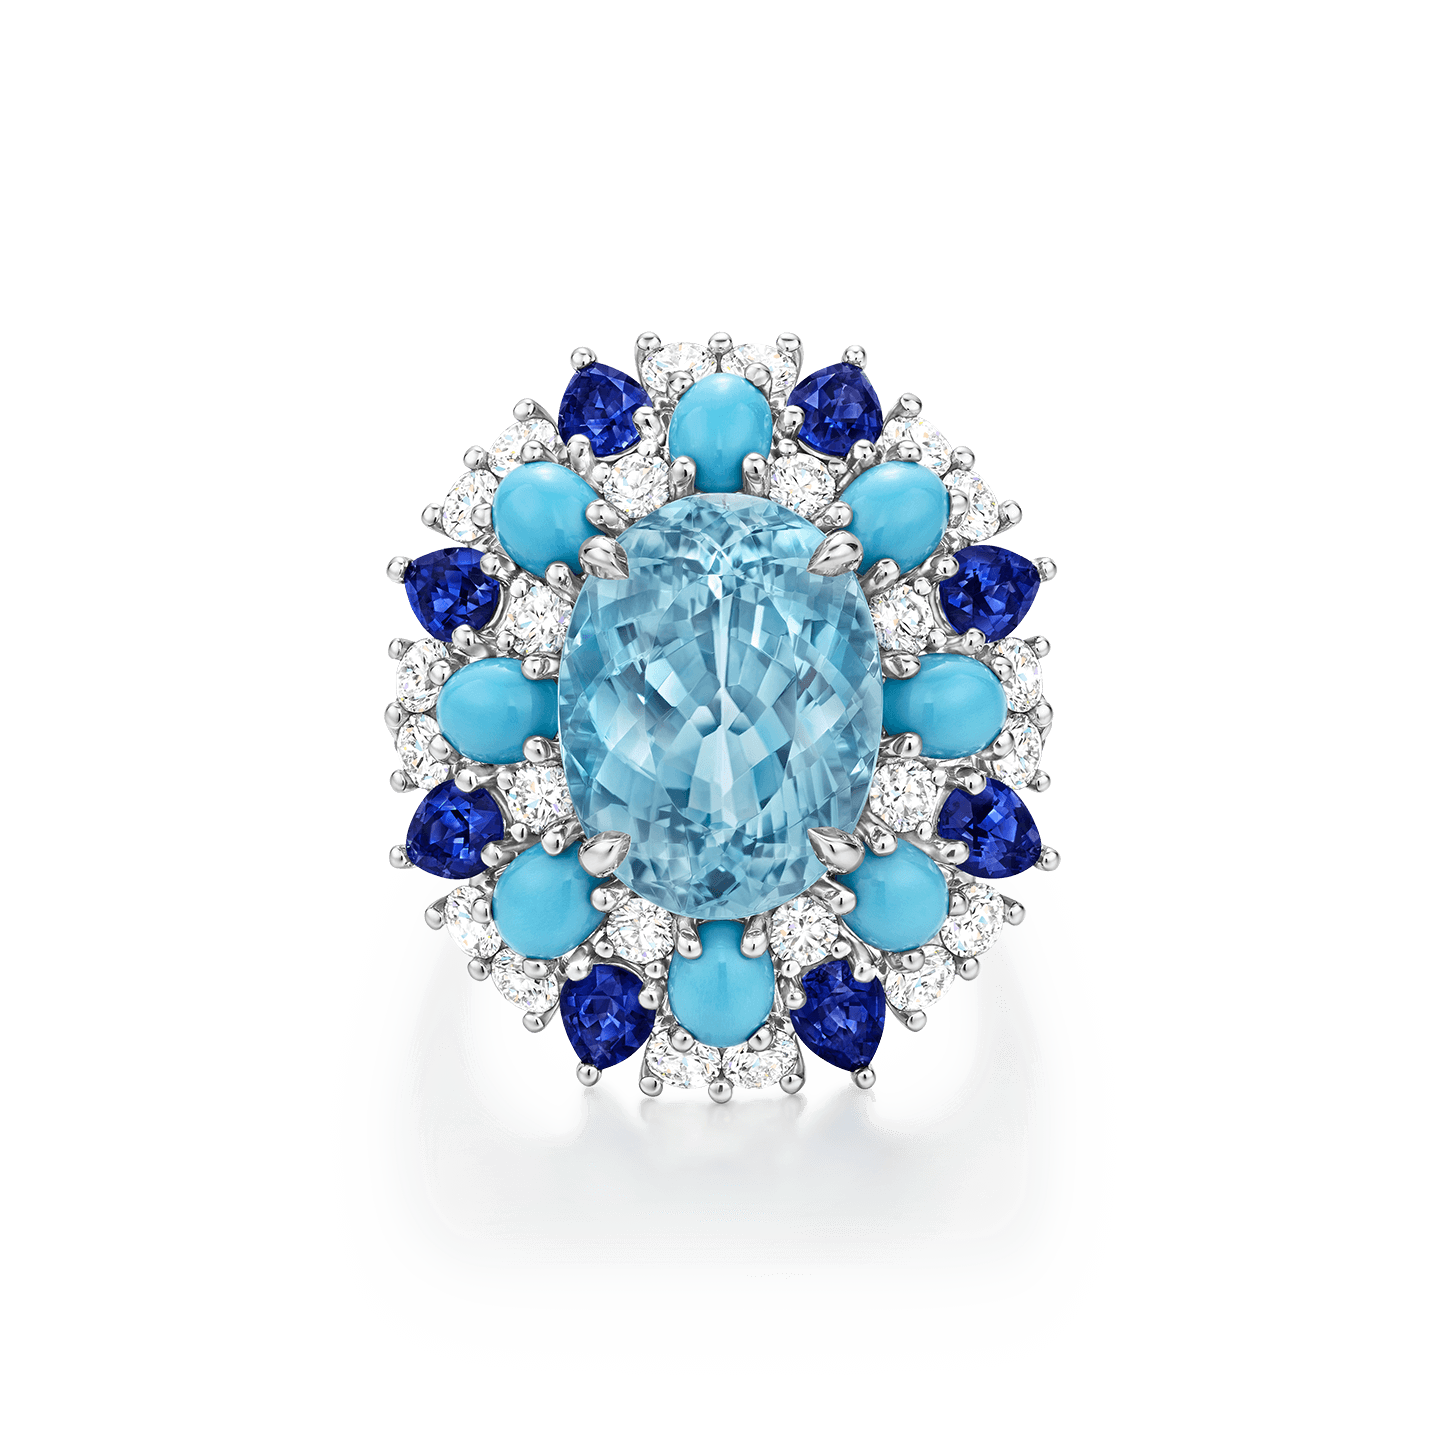 Winston Candy Paraiba Tourmaline Ring with Sapphires, Turquoise and Diamonds